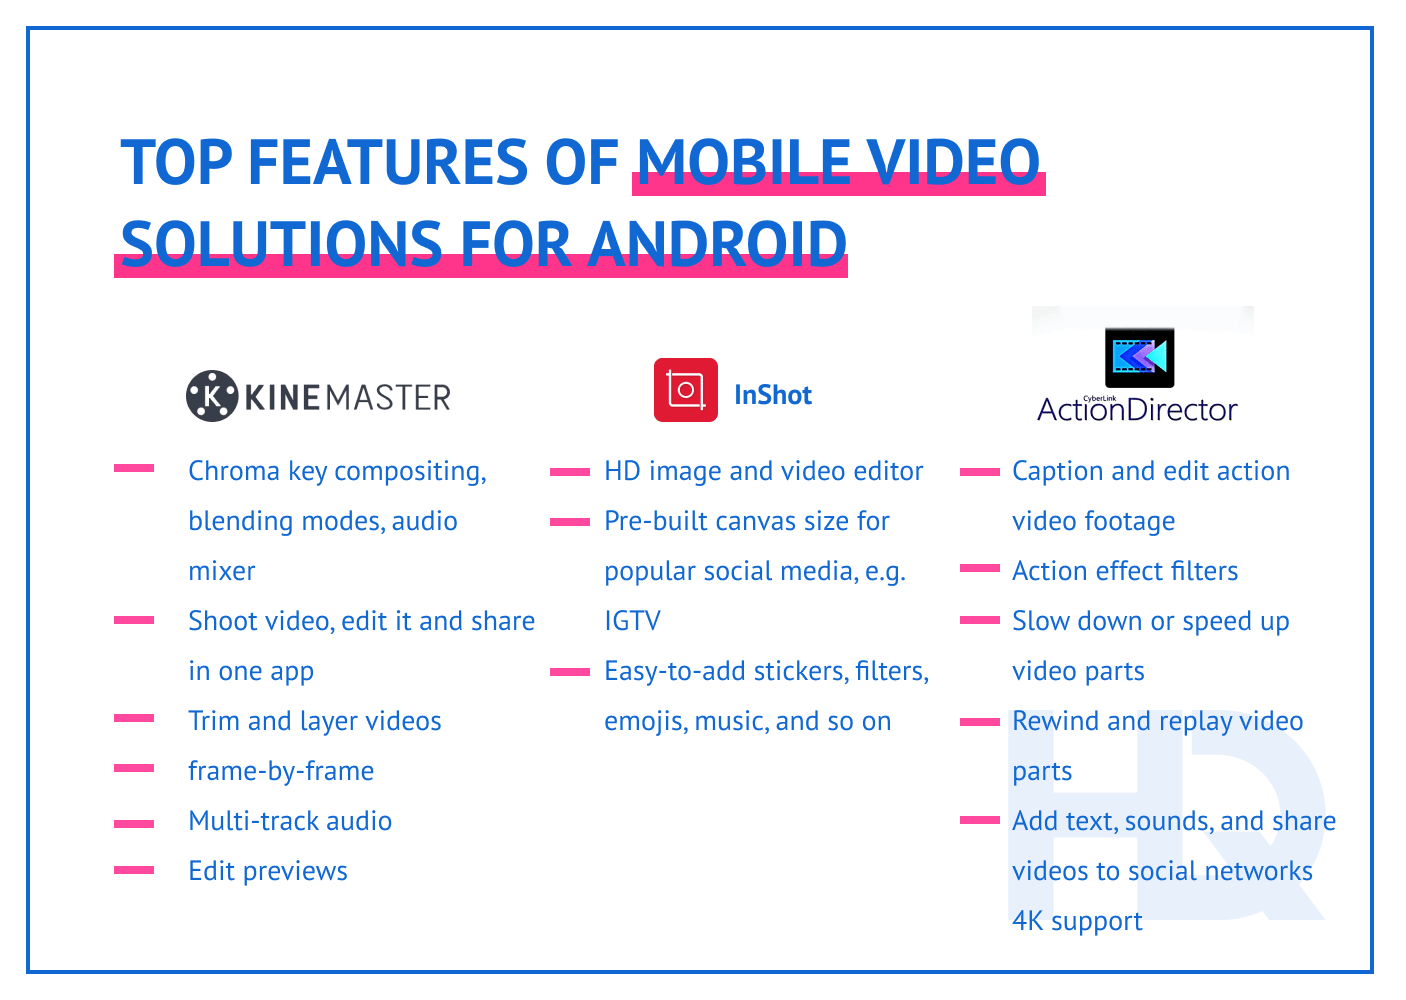 Features for mobile video solutions for Android.